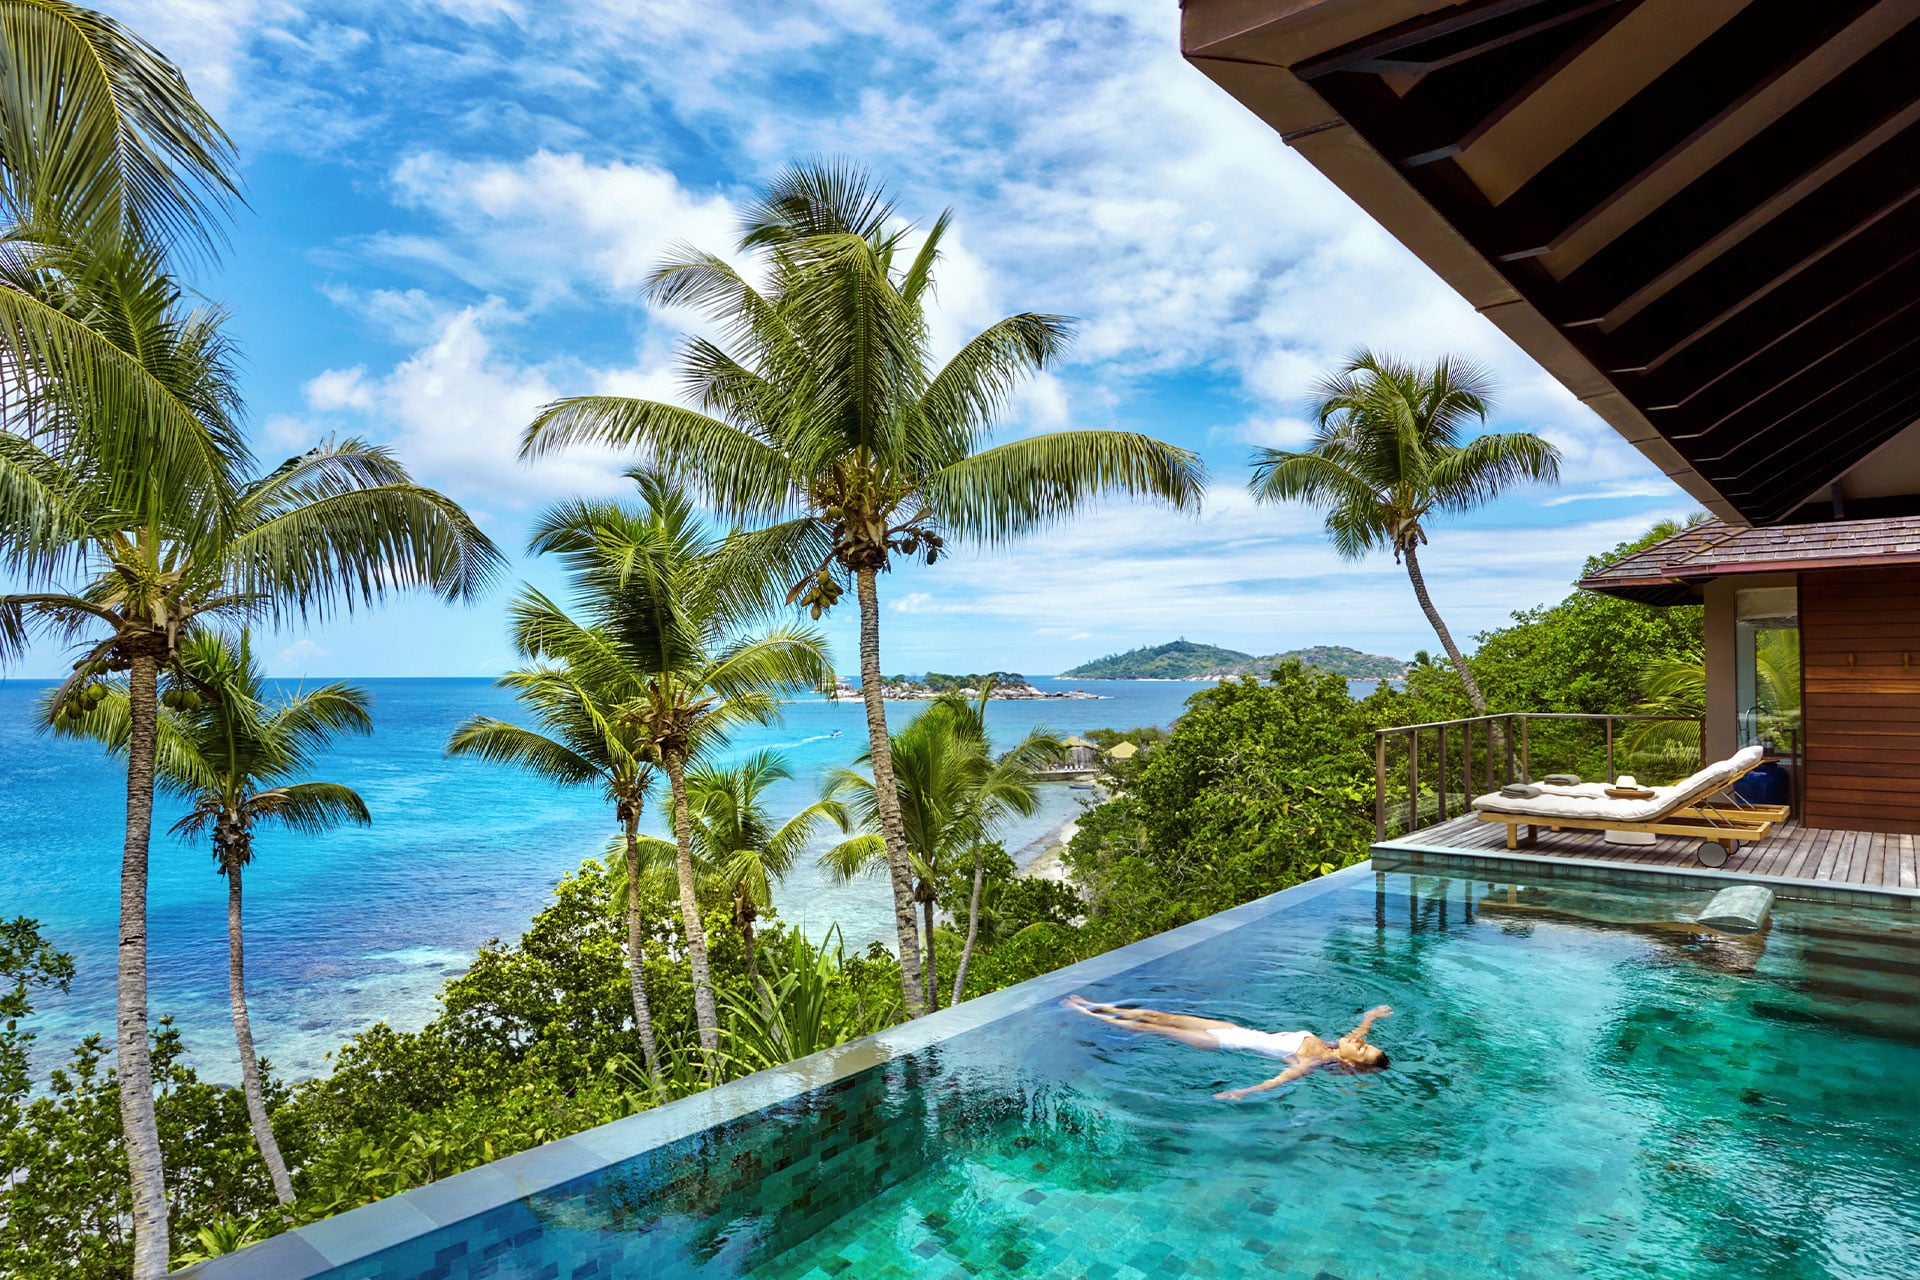 A two-bedroom pool villa and view of the ocean at Six Senses Zil Pasyon.